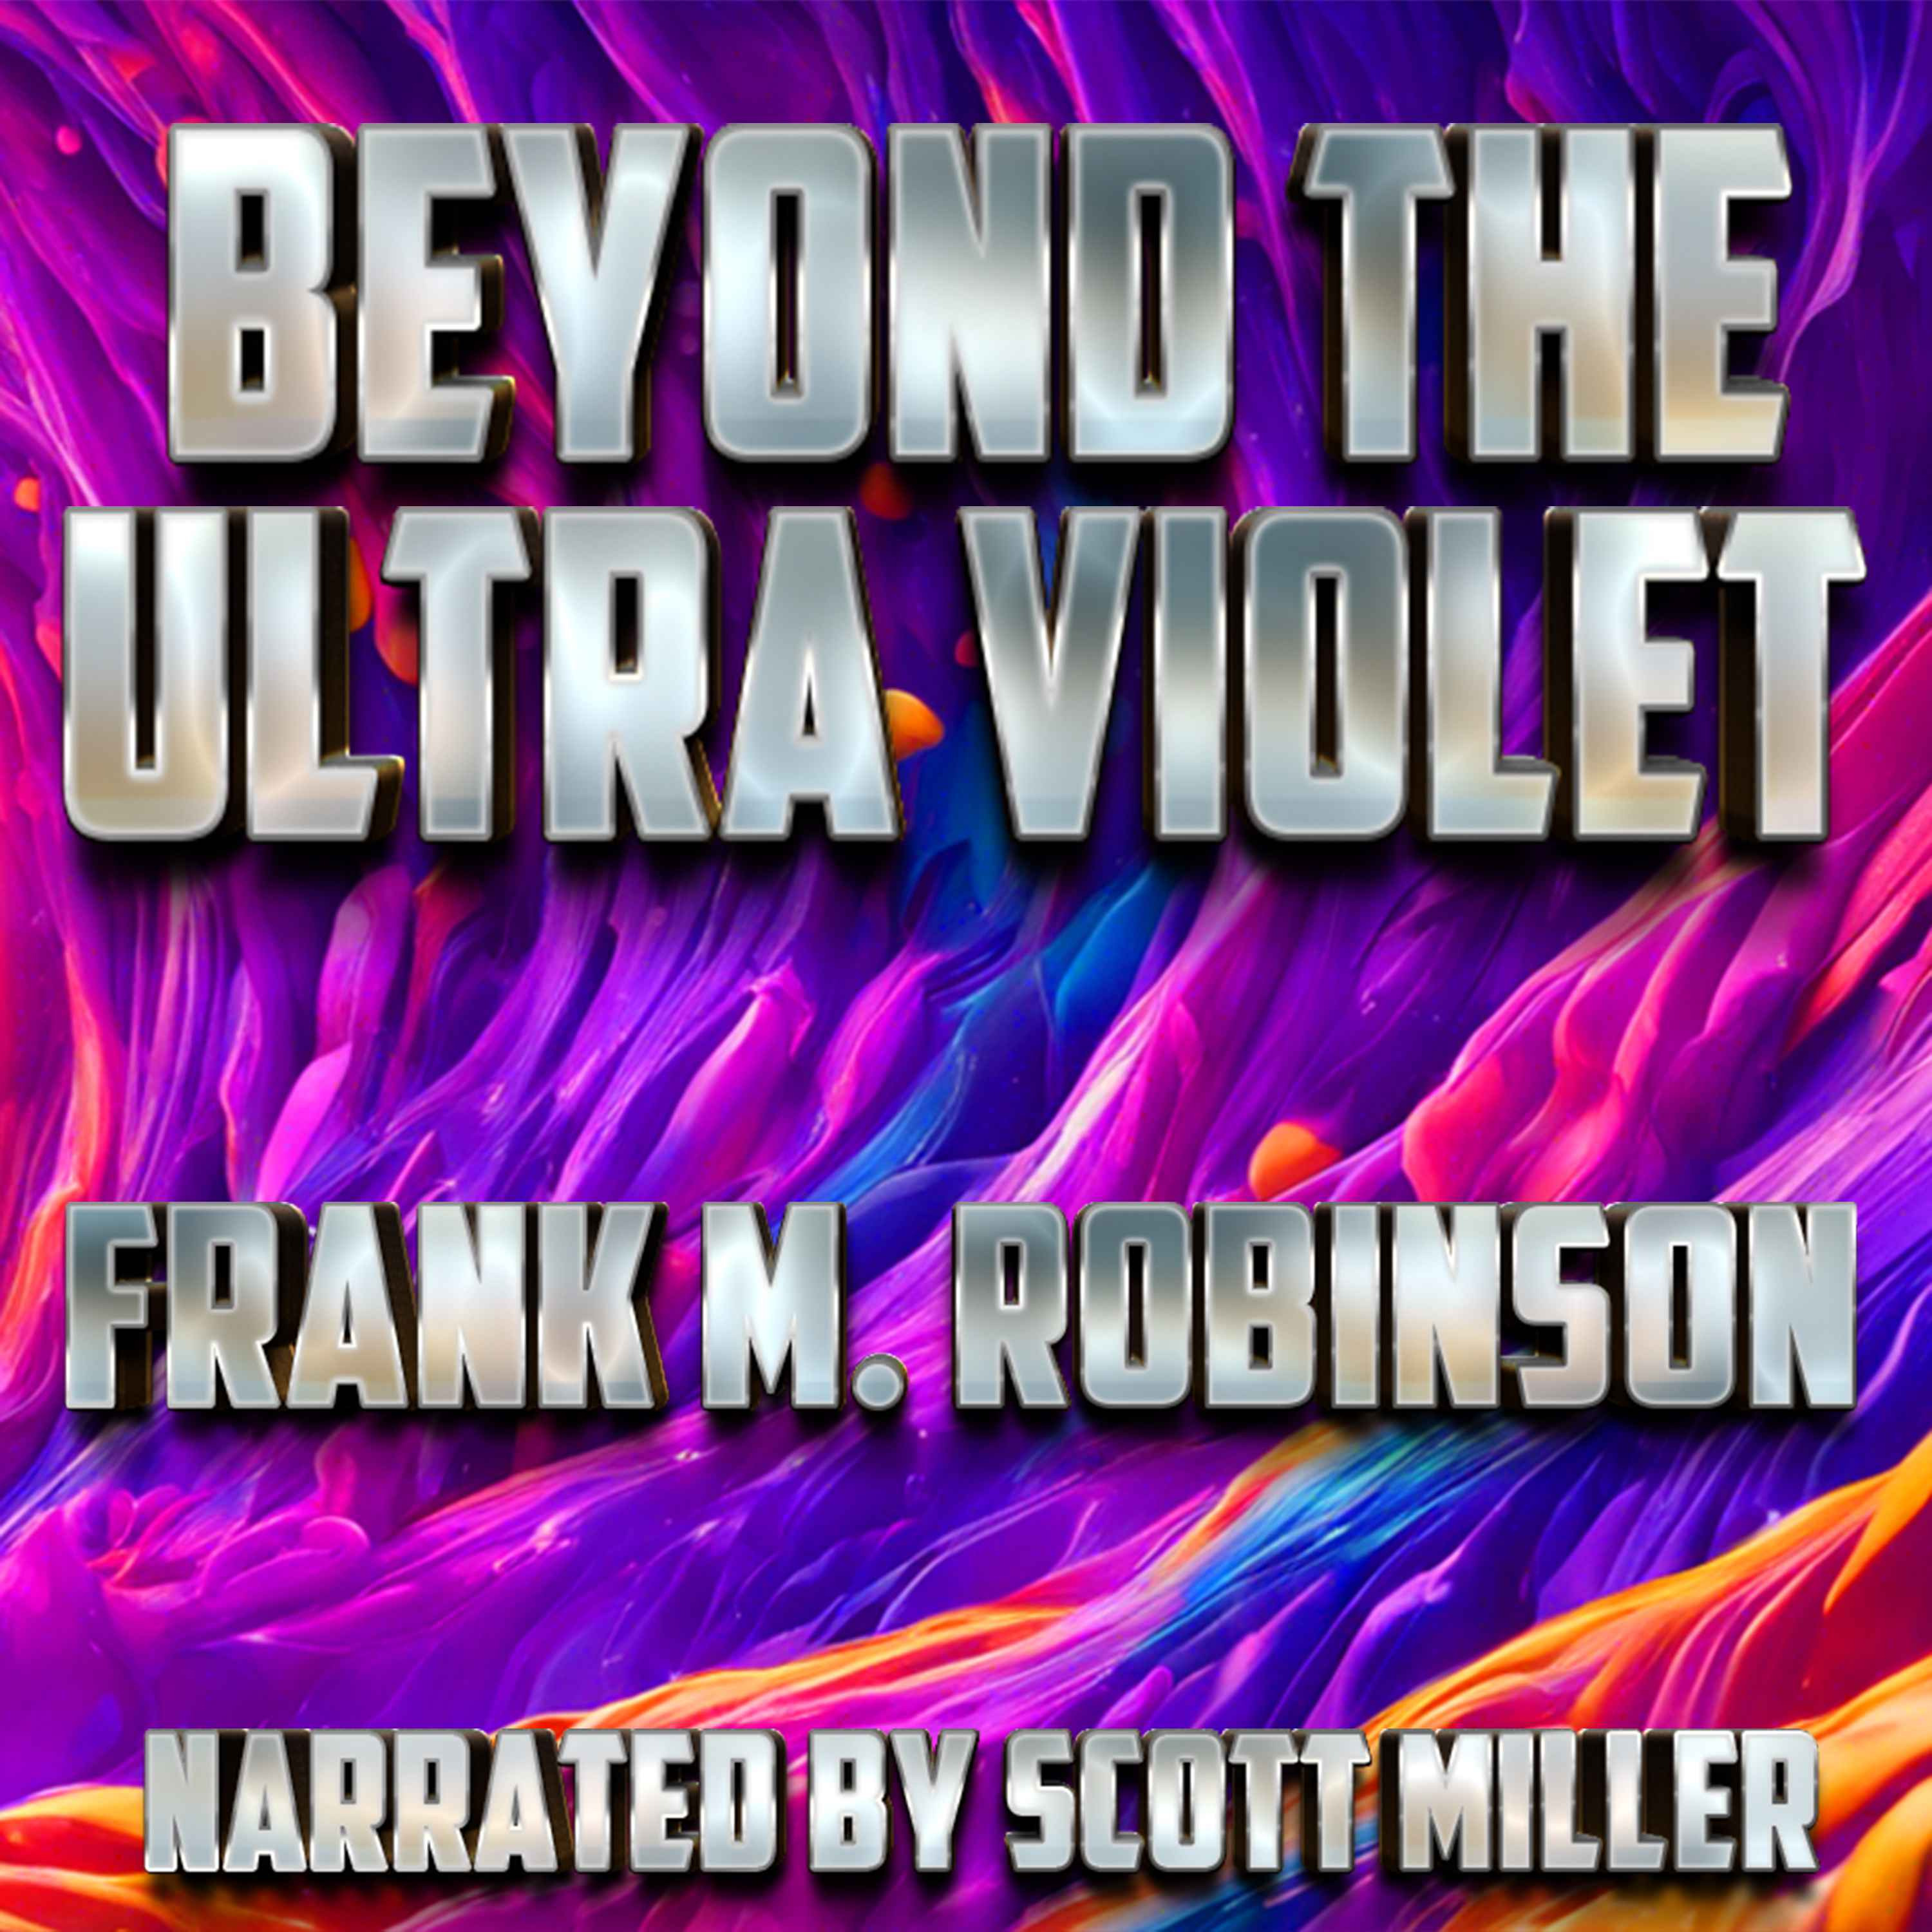 Beyond the Ultra Violet by Frank M. Robinson - Science Fiction Short Story From the 1950s